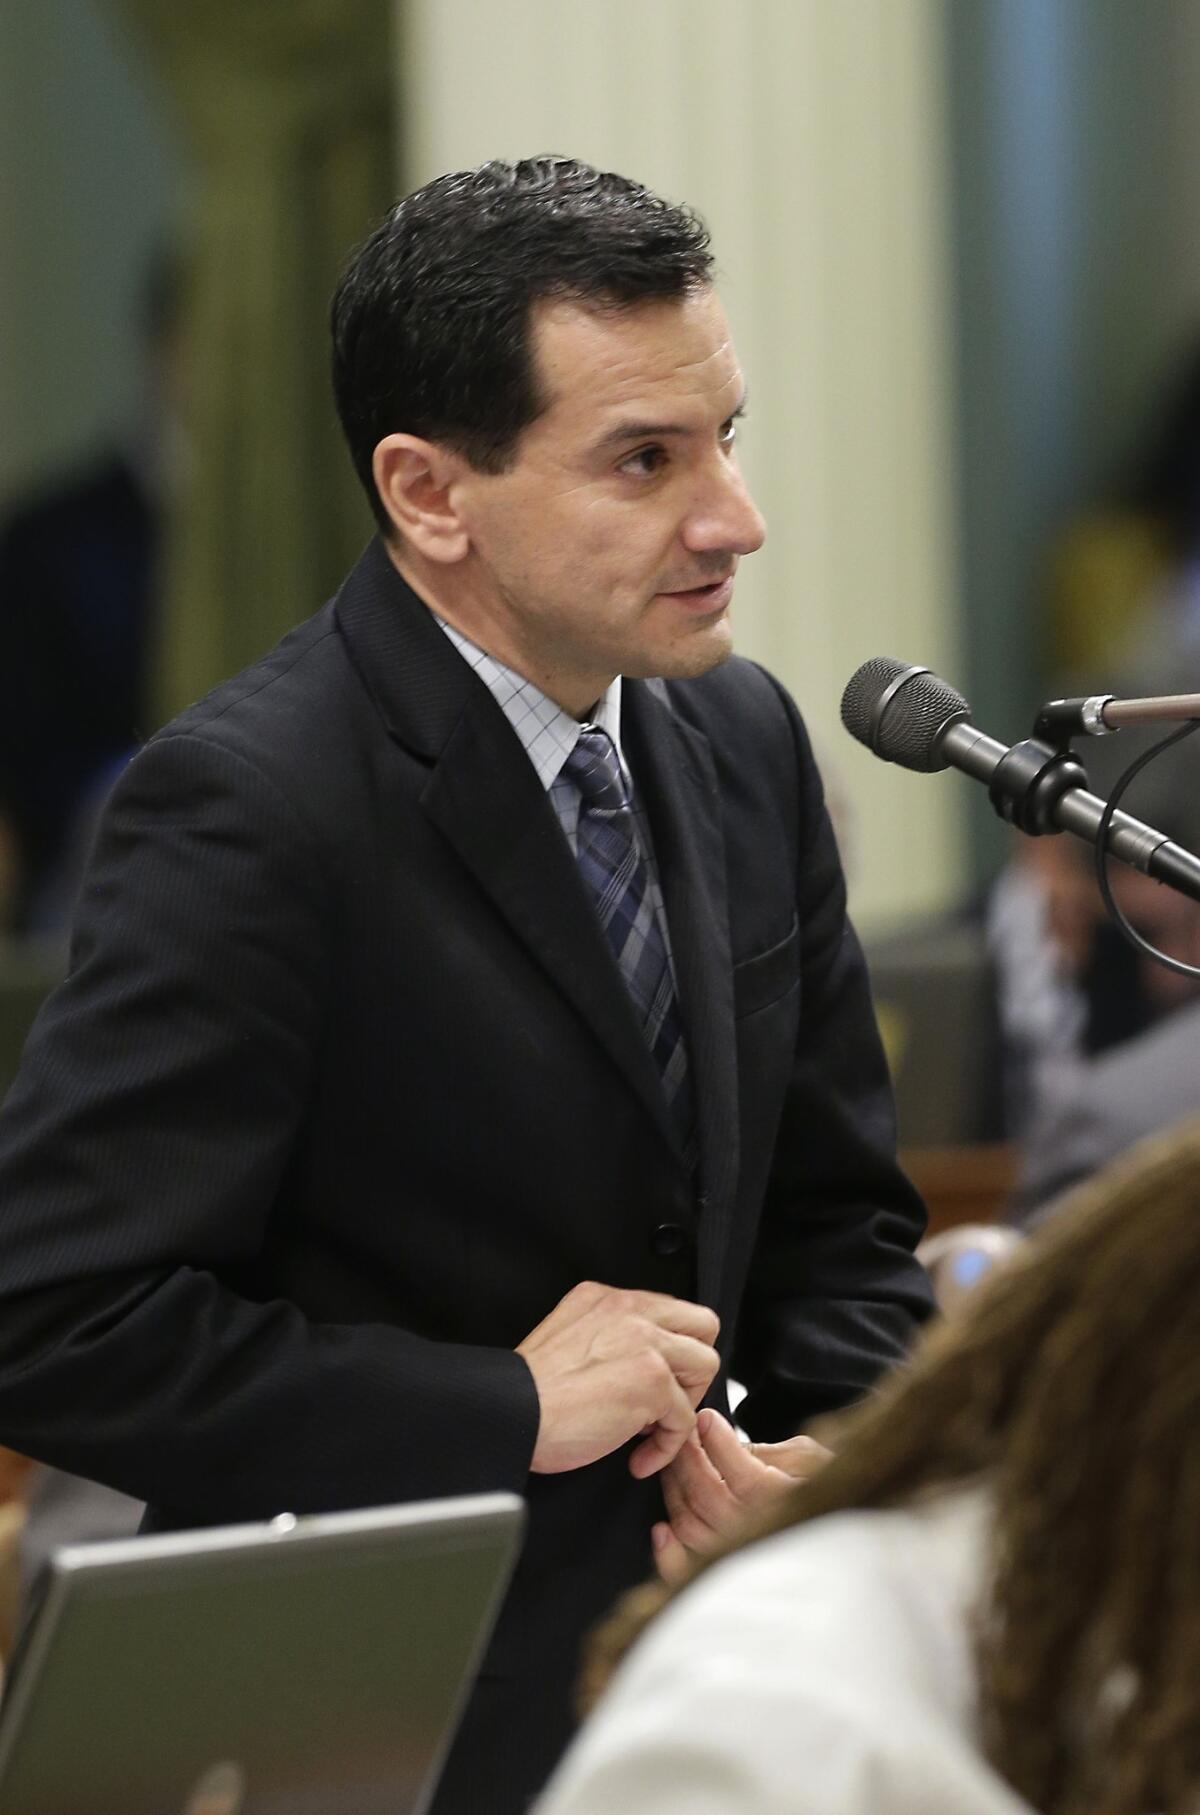 Legislation by Assemblyman Anthony Rendon (D-Lakewood) would require three private water companies in Maywood to operate more like public agencies, with open financial books and audits.